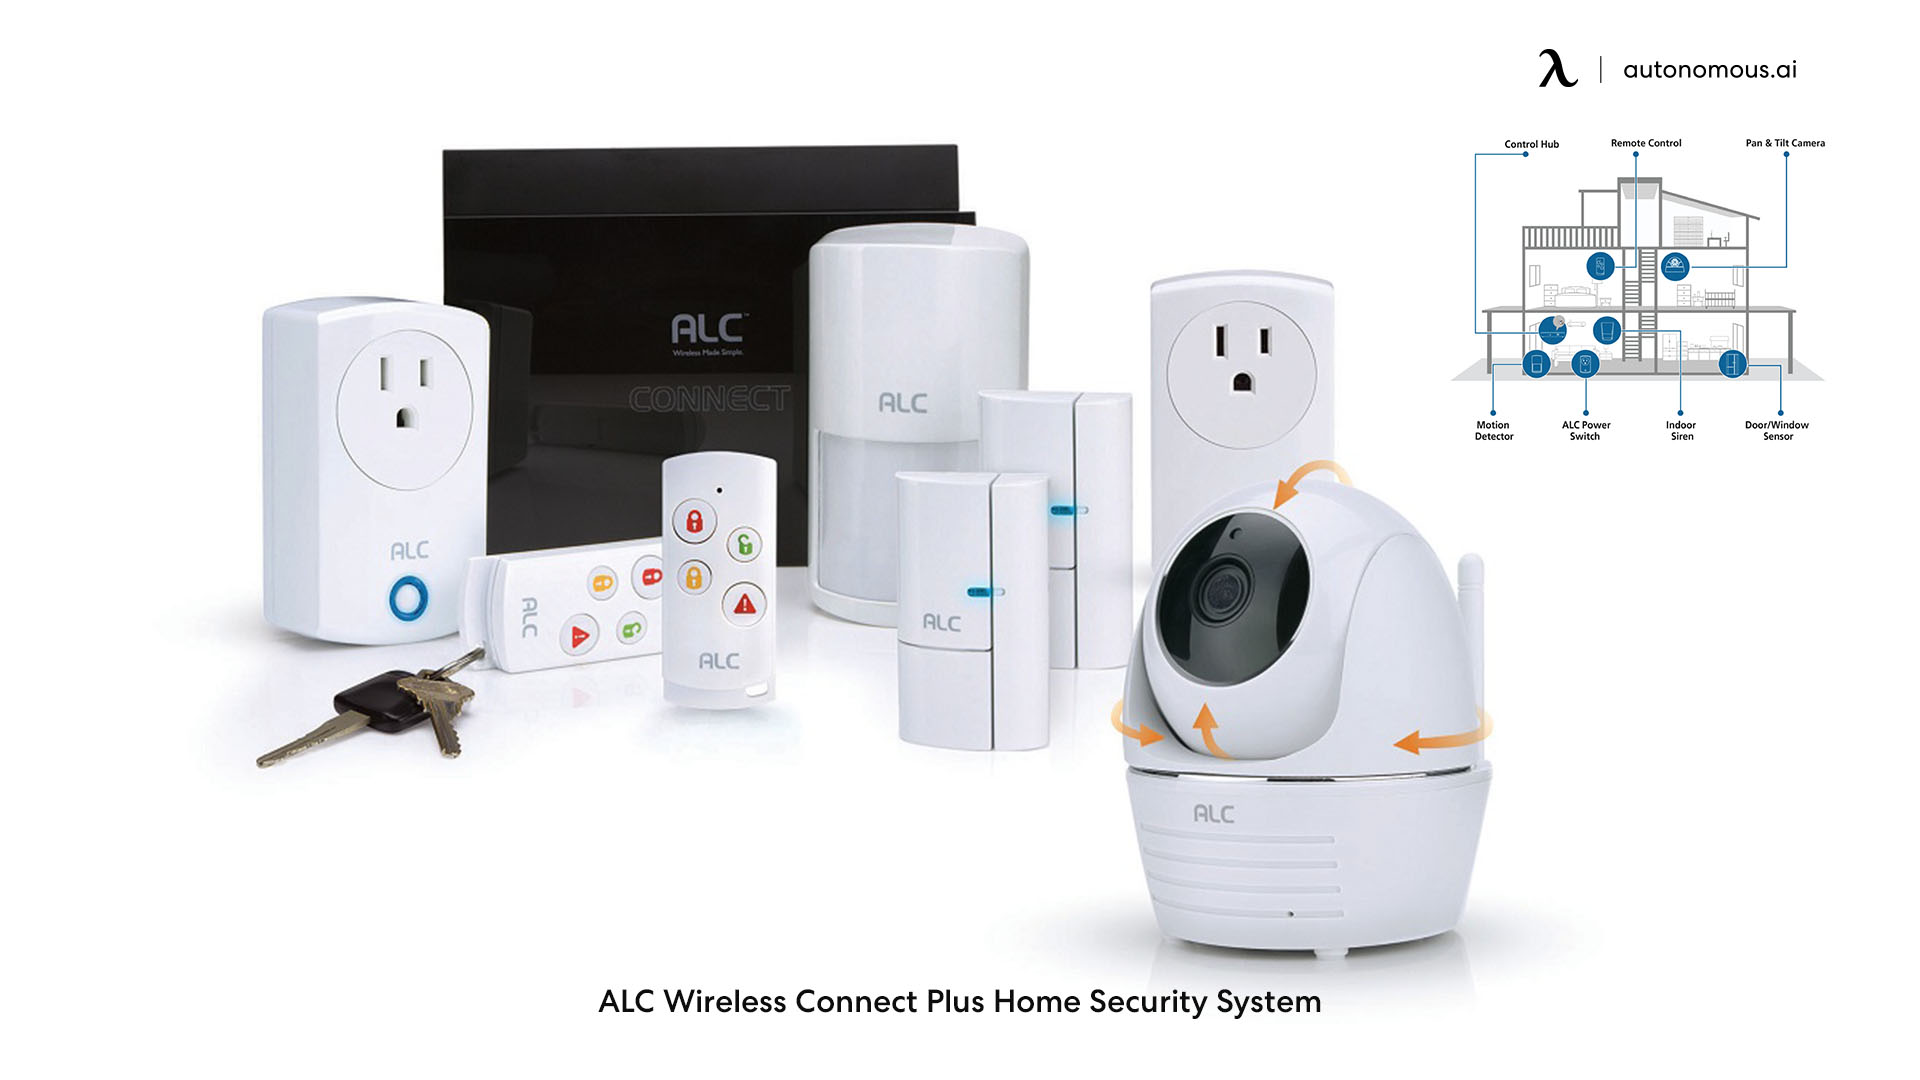 ALC Wireless Connect Plus Home Security System